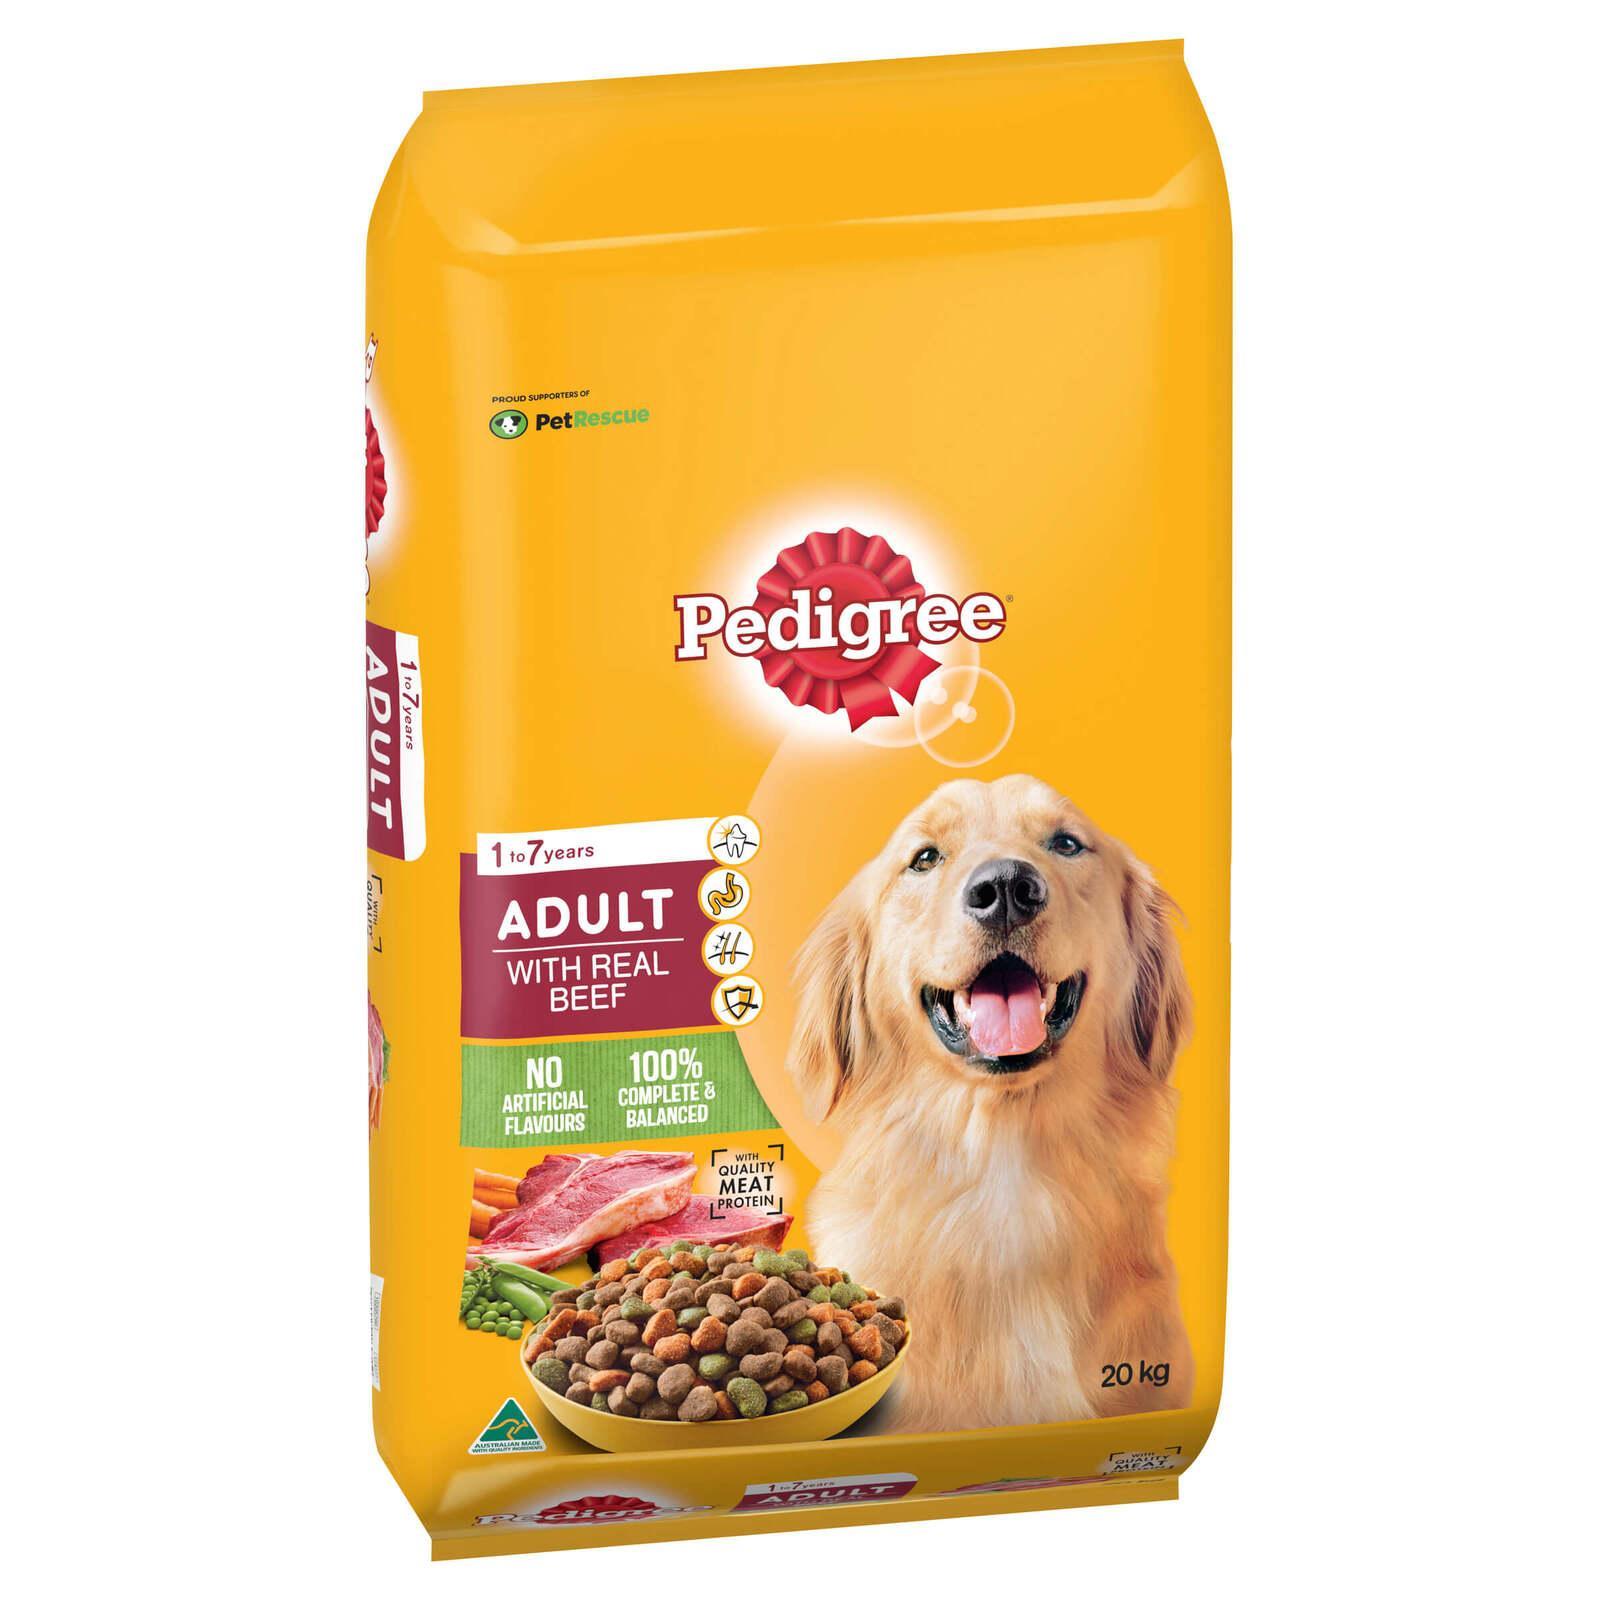 Pedigree Adult 1+ Meaty Bites Dry Dog Food with Real Beef 20kg